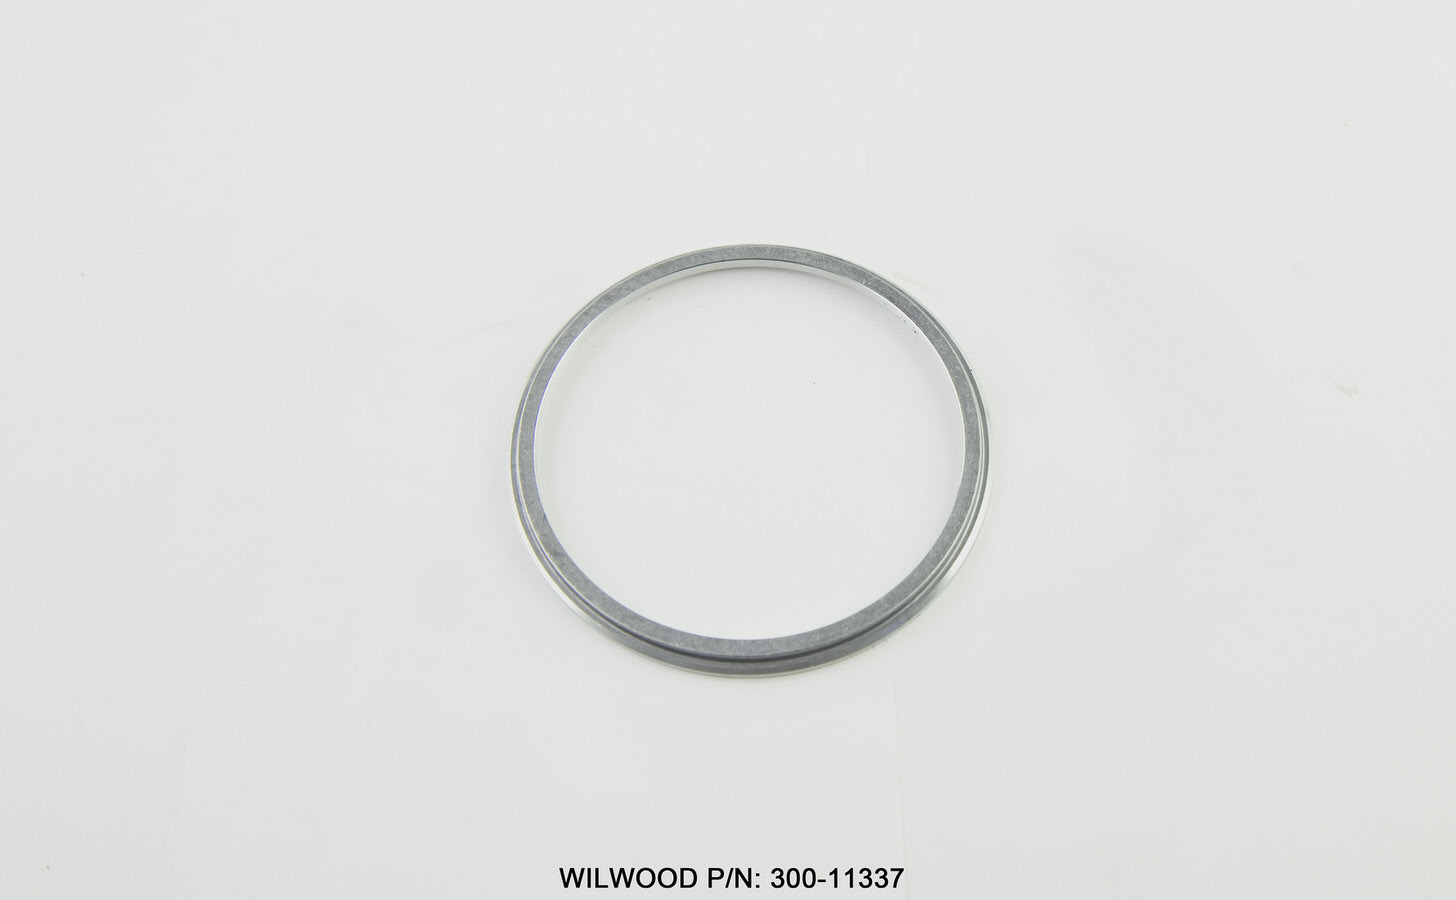 WIL-300-11337 #1